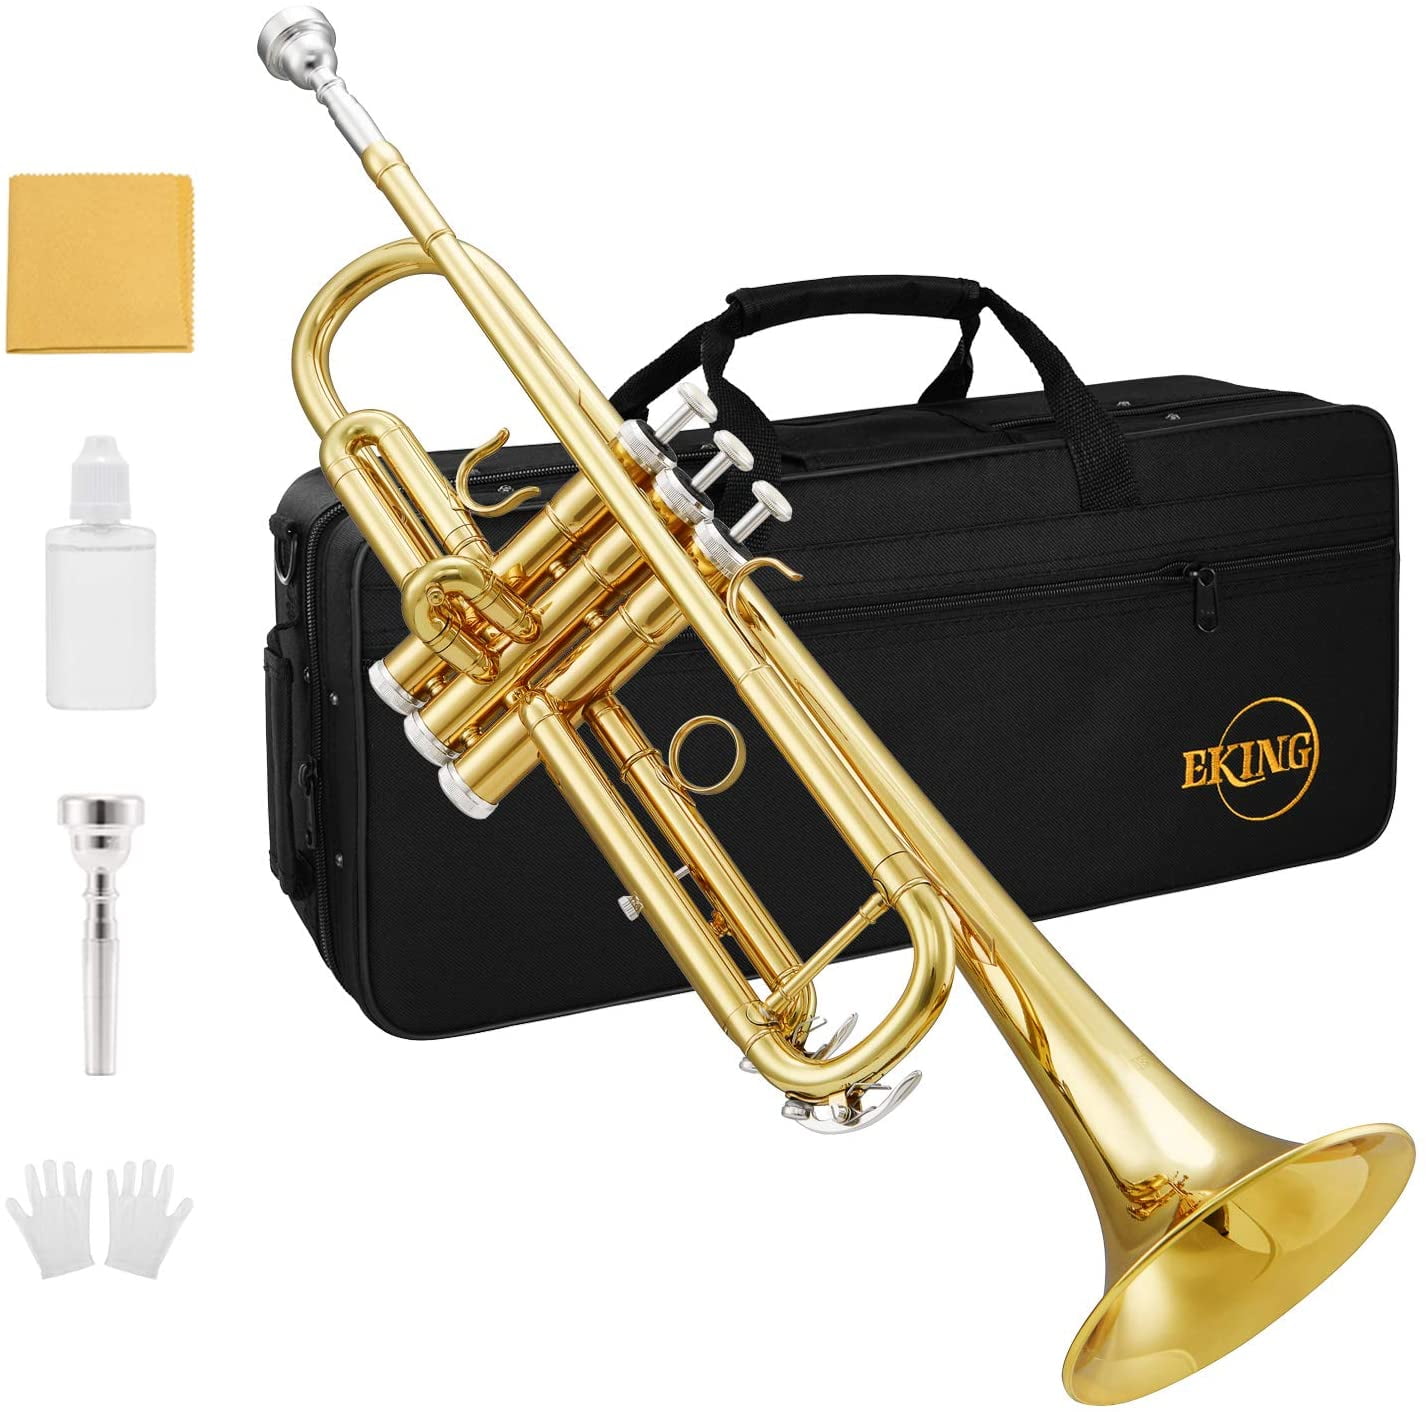 TRUMPET Bb PITCH BRASS GOLD LOOK WITH FREE HARD CASE AND MOUTHPIECE 